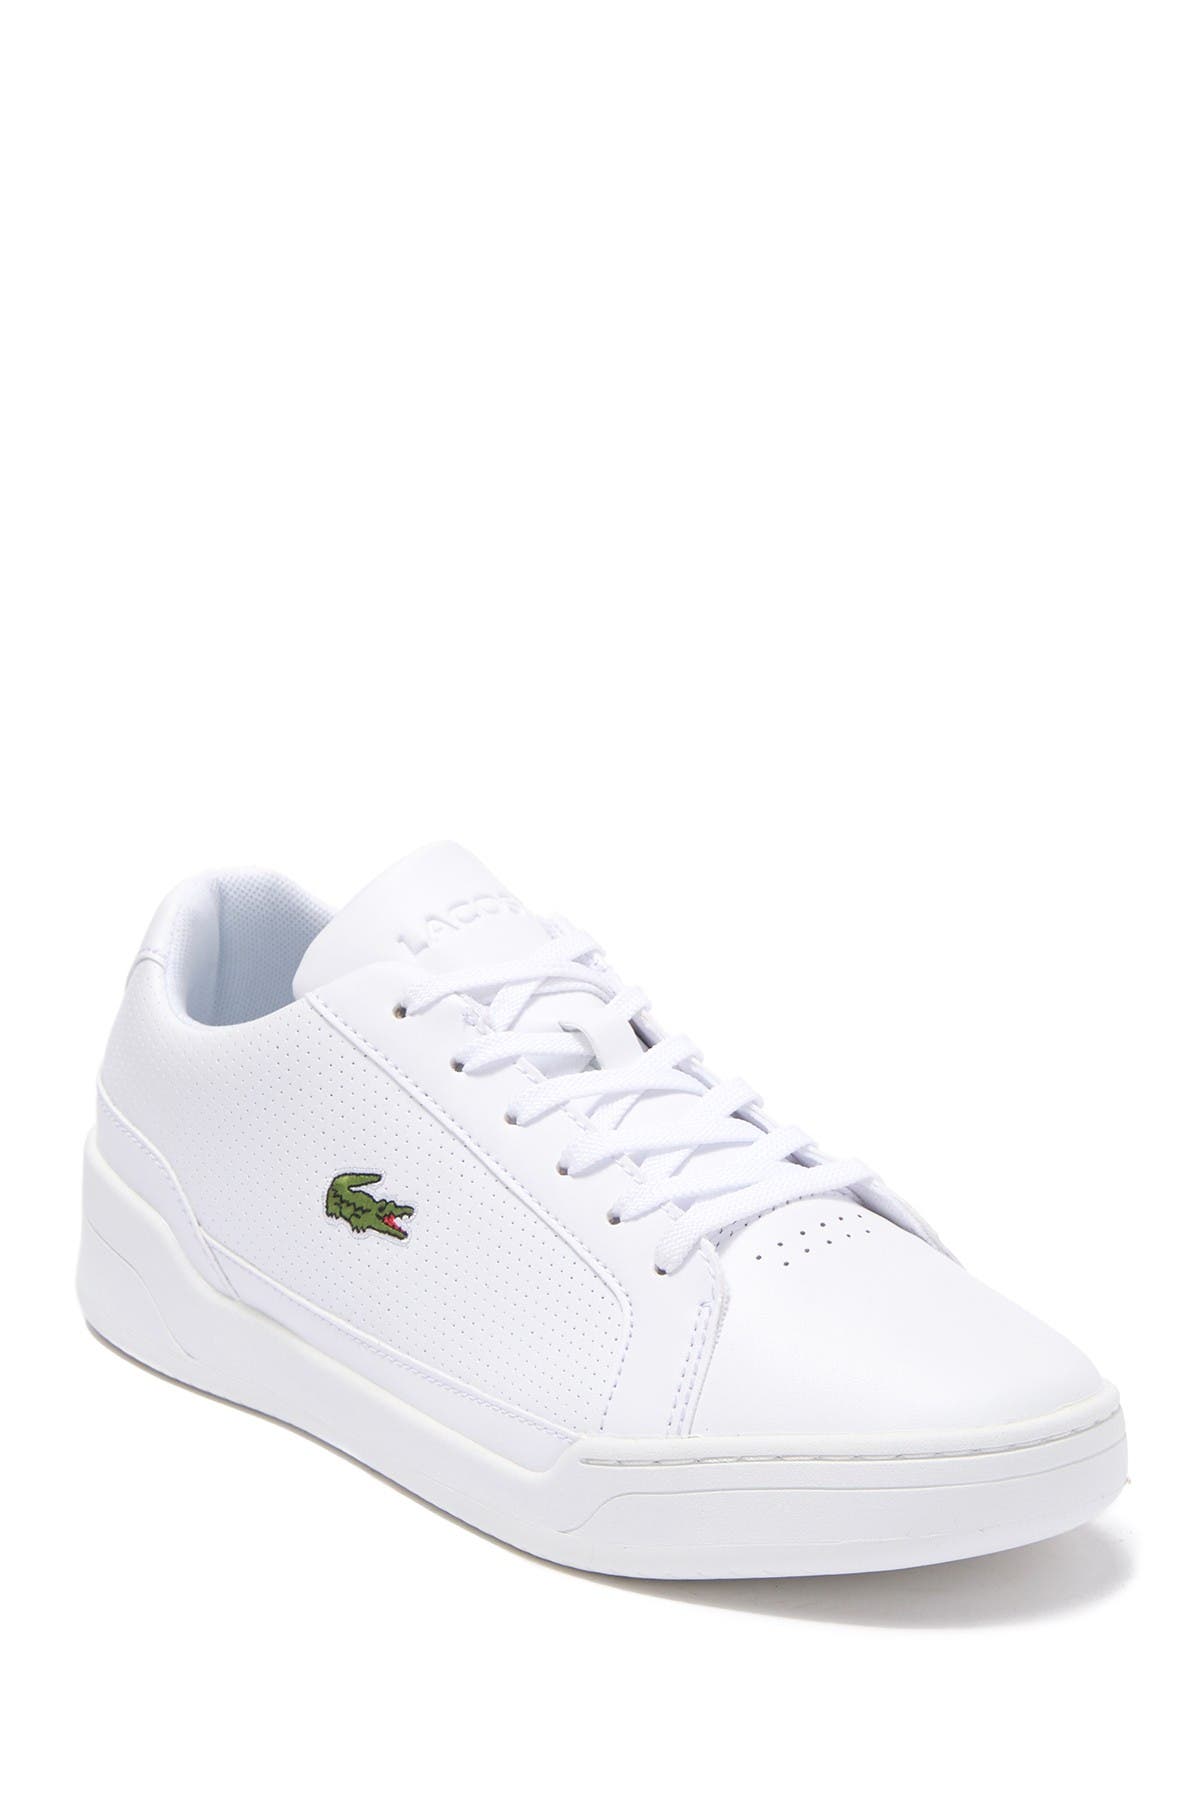 nordstrom rack lacoste shoes